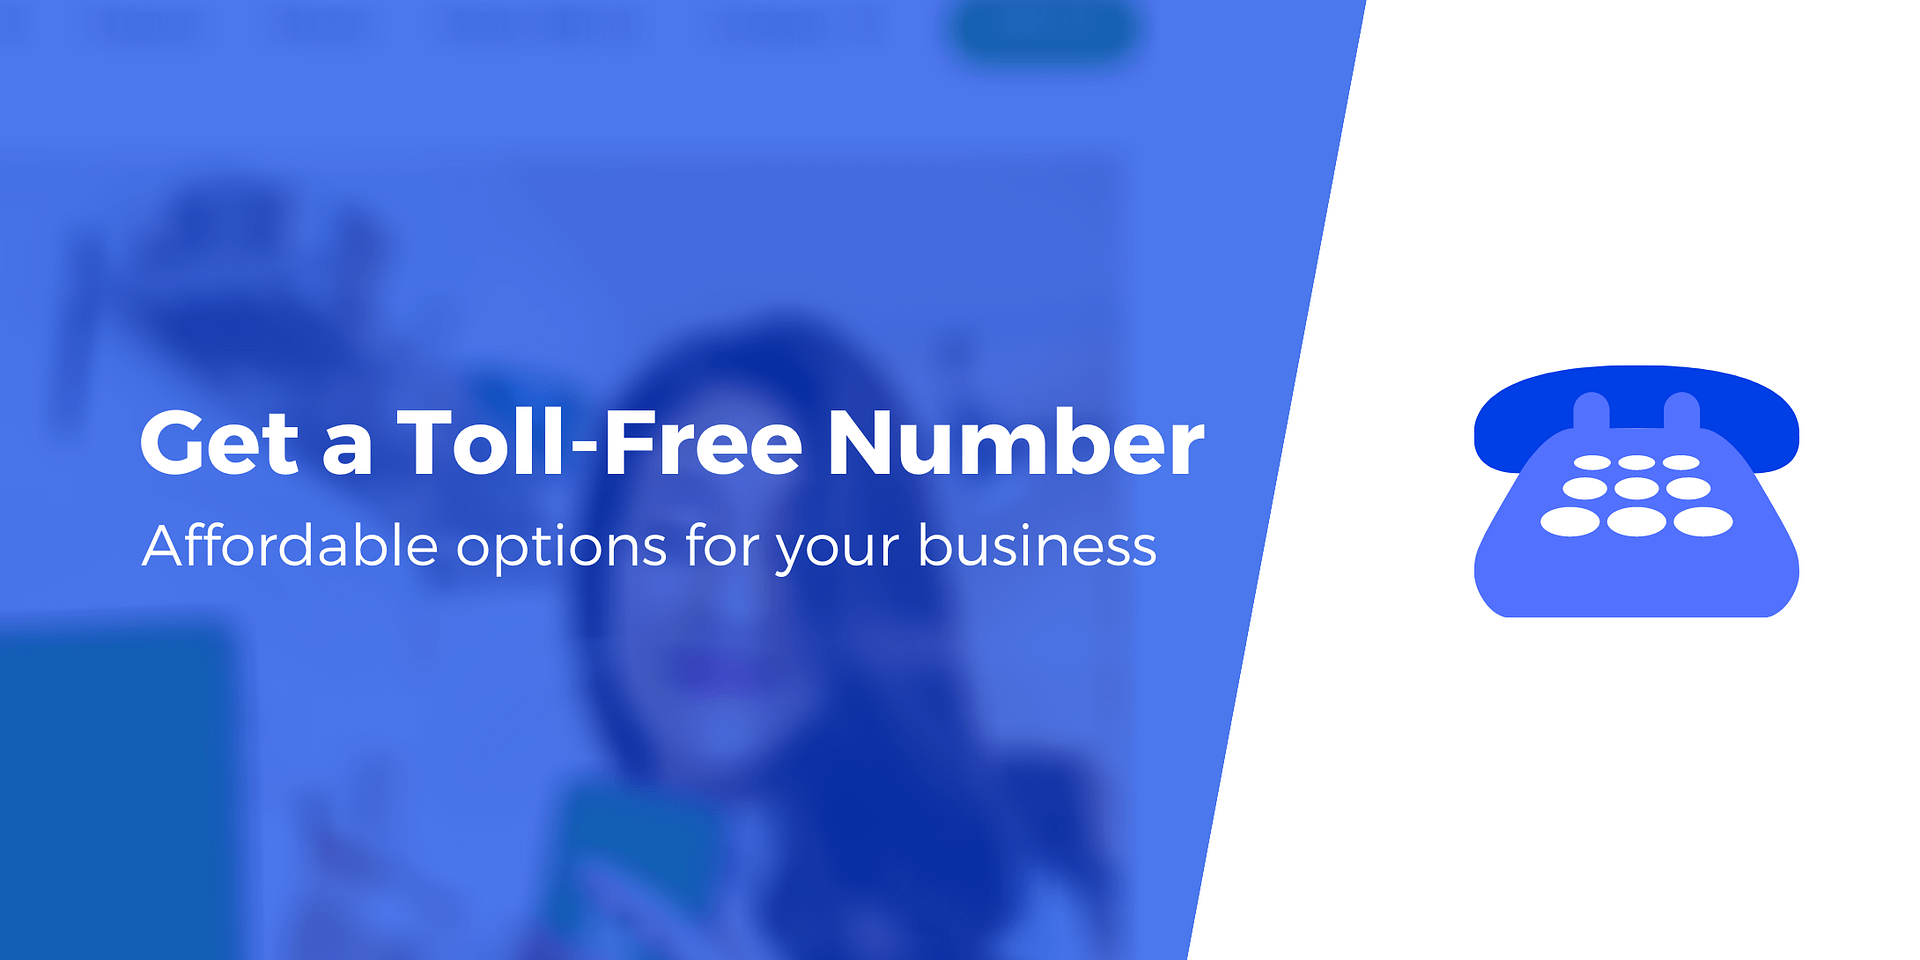 5 Ways to Get a TollFree Number (Affordable Services)